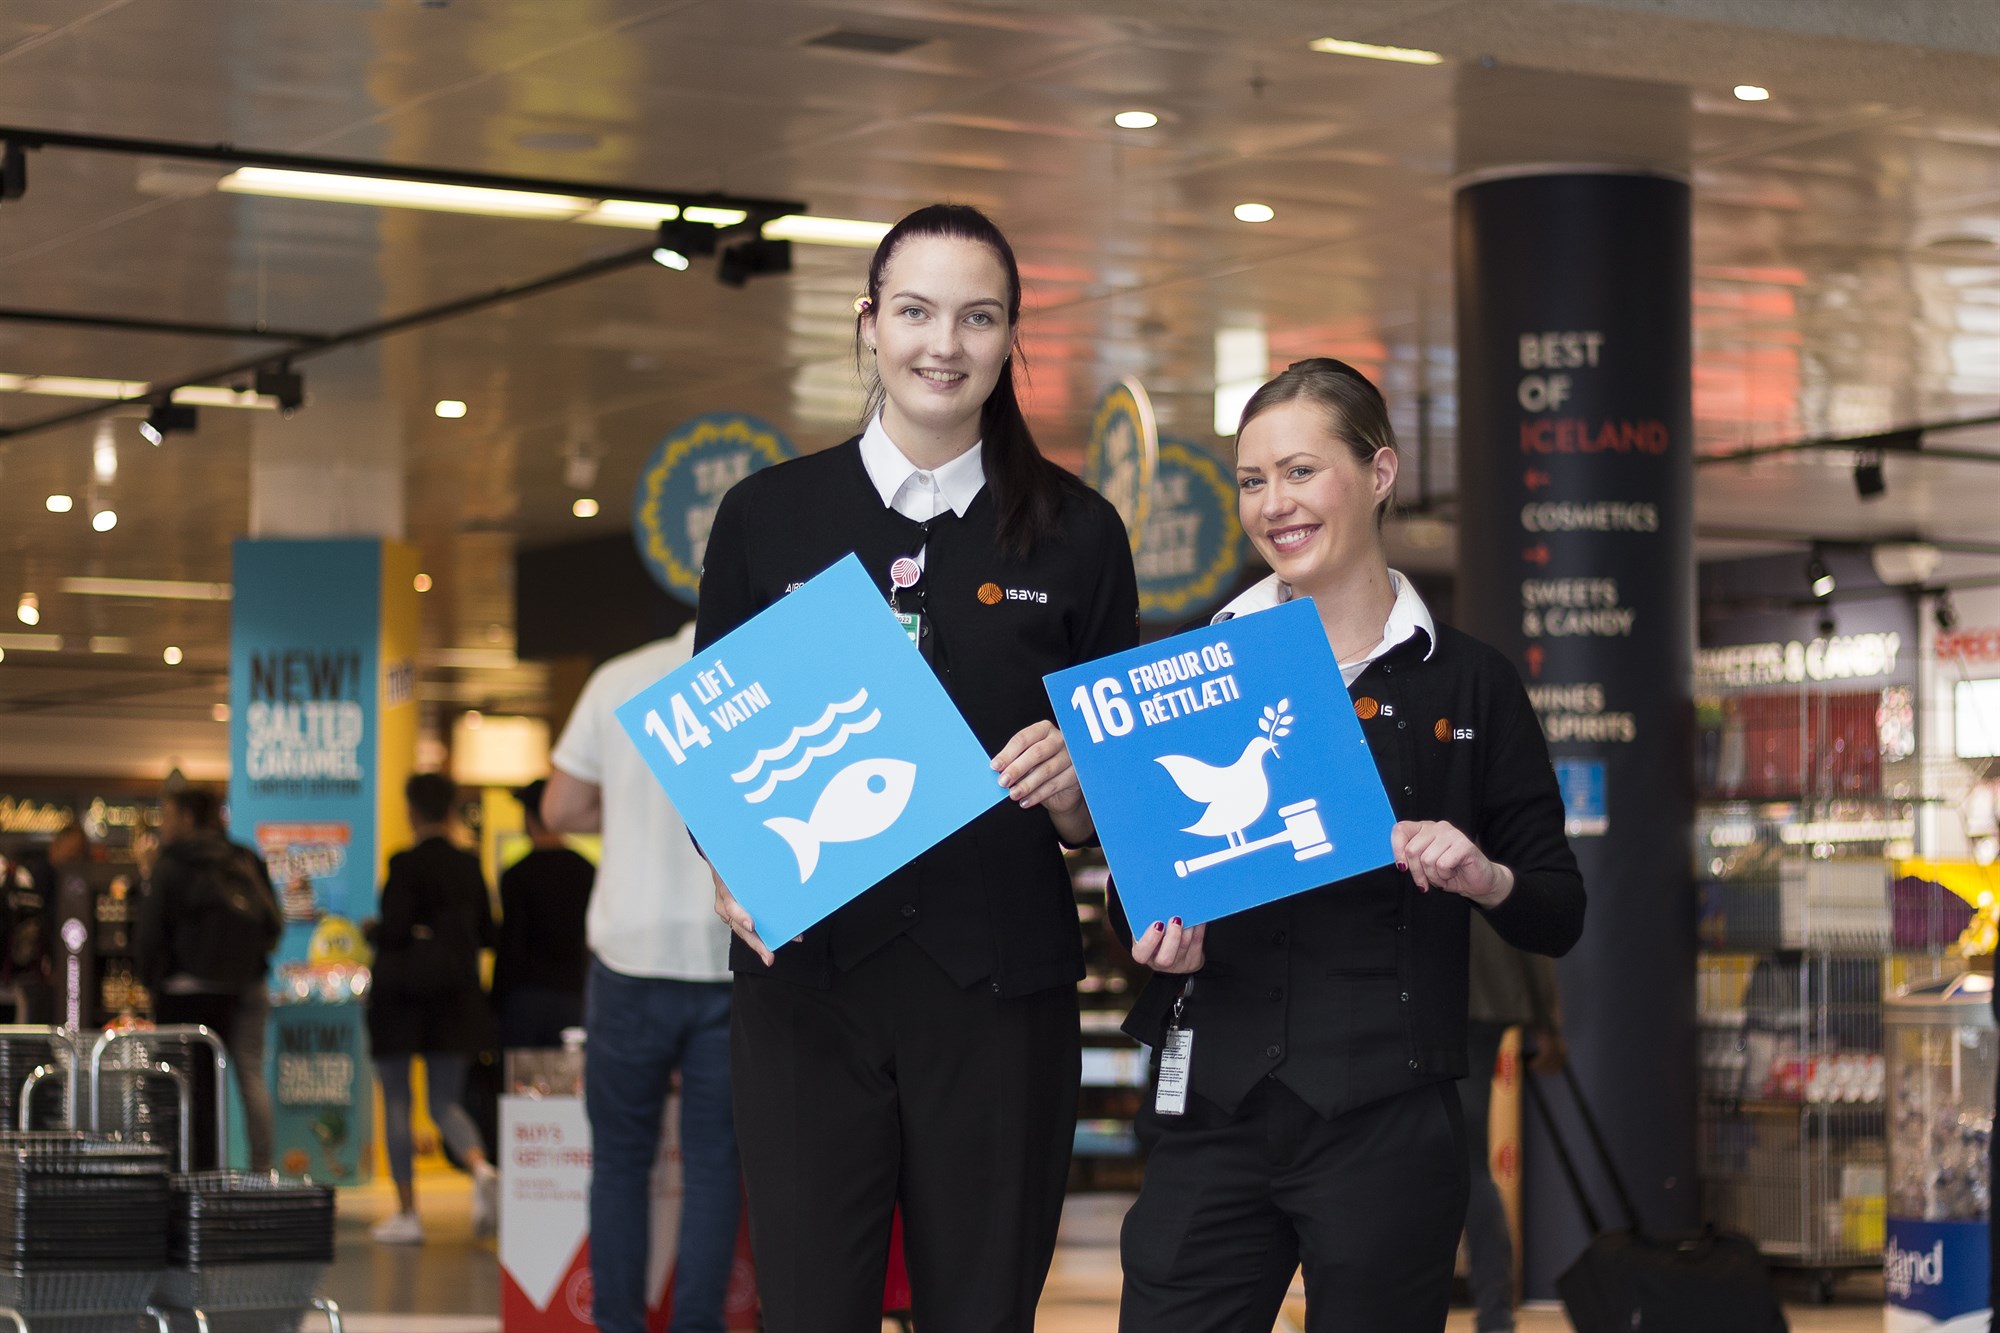 Two employees showing Sustainable development goals